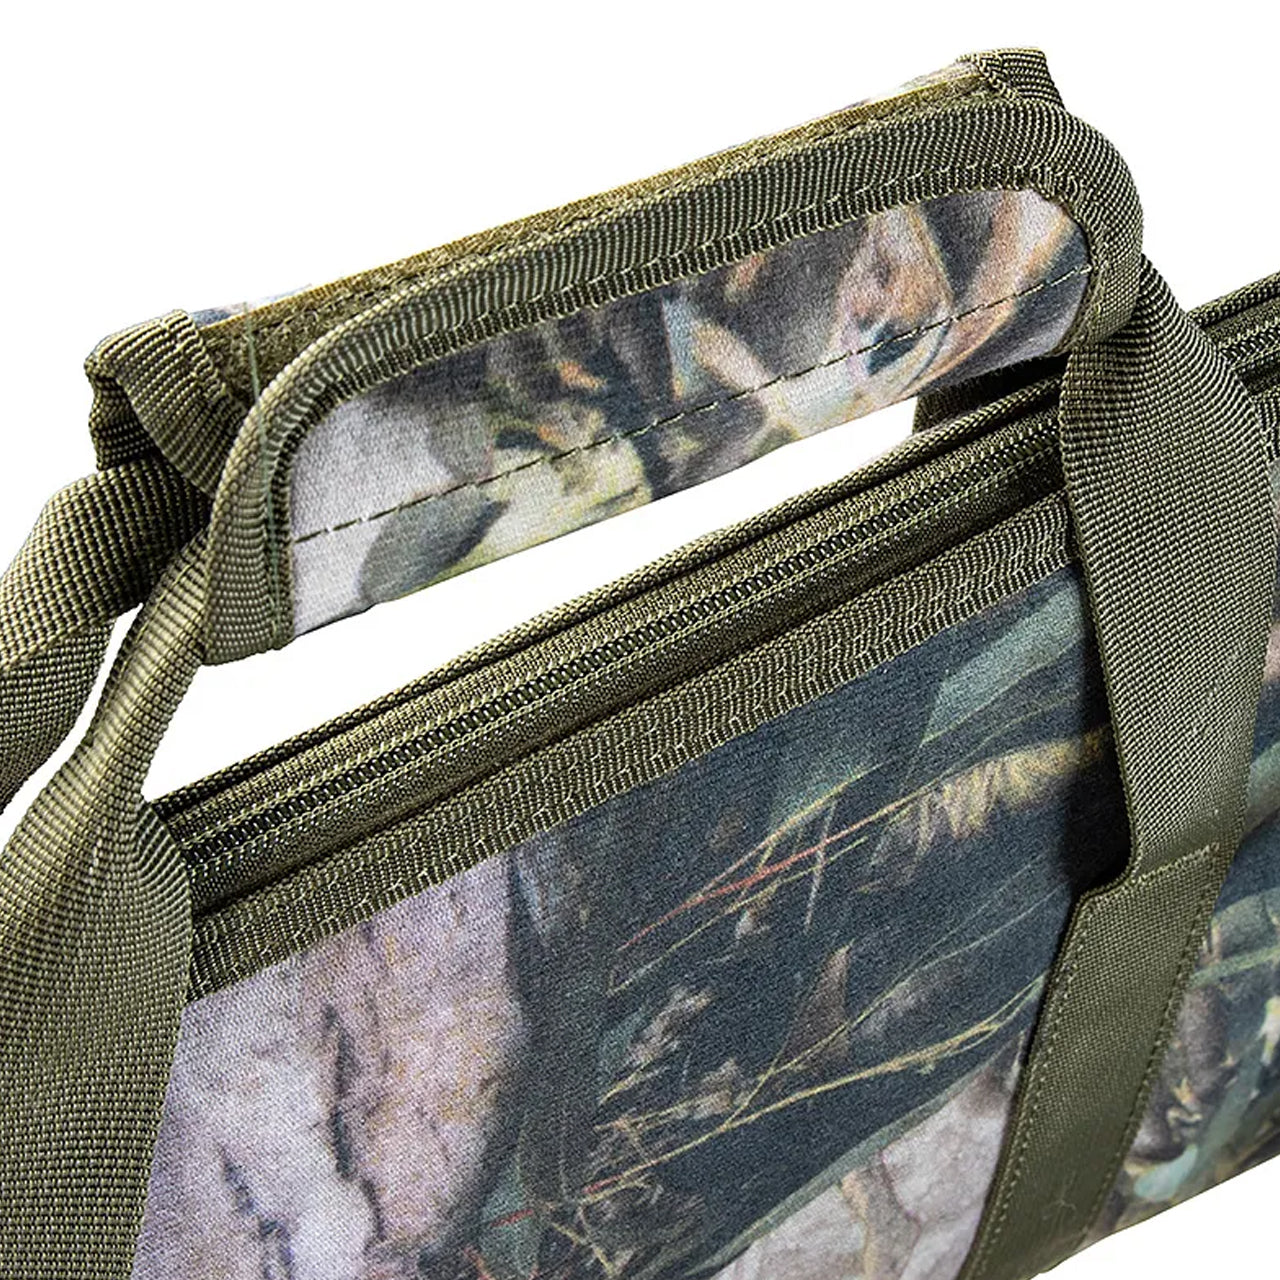 Austealth Native Camouflage Gun Bag delivers unbeatable protection for your gun with its 400gsm knit fabric with PVC coating, YKK zips, extra padding, barrel end reinforcement, side pocket for chokes and cleaning products, and a longside pocket for a cleaning rod. It's also designed for comfort, with a padded shoulder carry sling for ease of transport! Superb protection and comfort for your rifle! www.defenceqstore.com.au